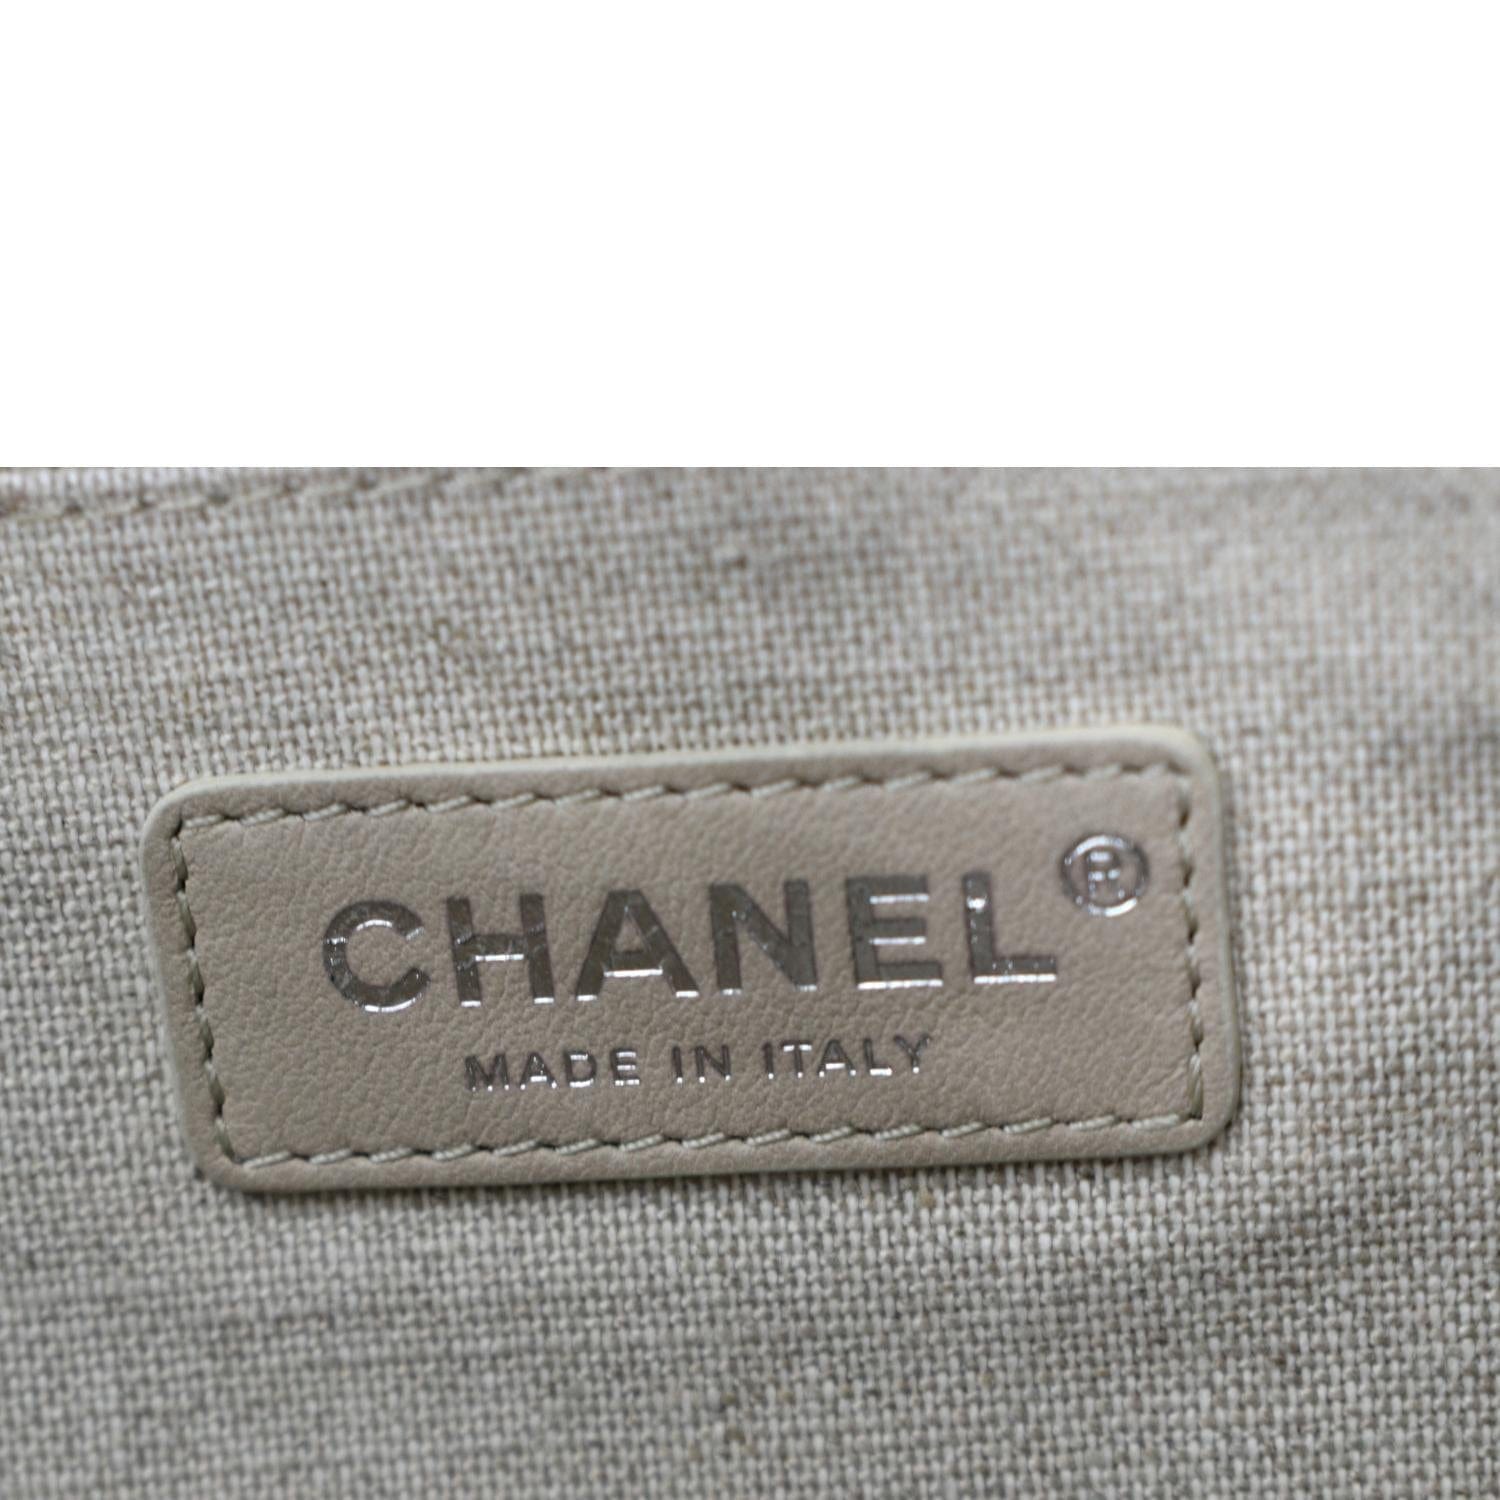 Chanel's Product Page – 526 of 1077 Product Page Examples